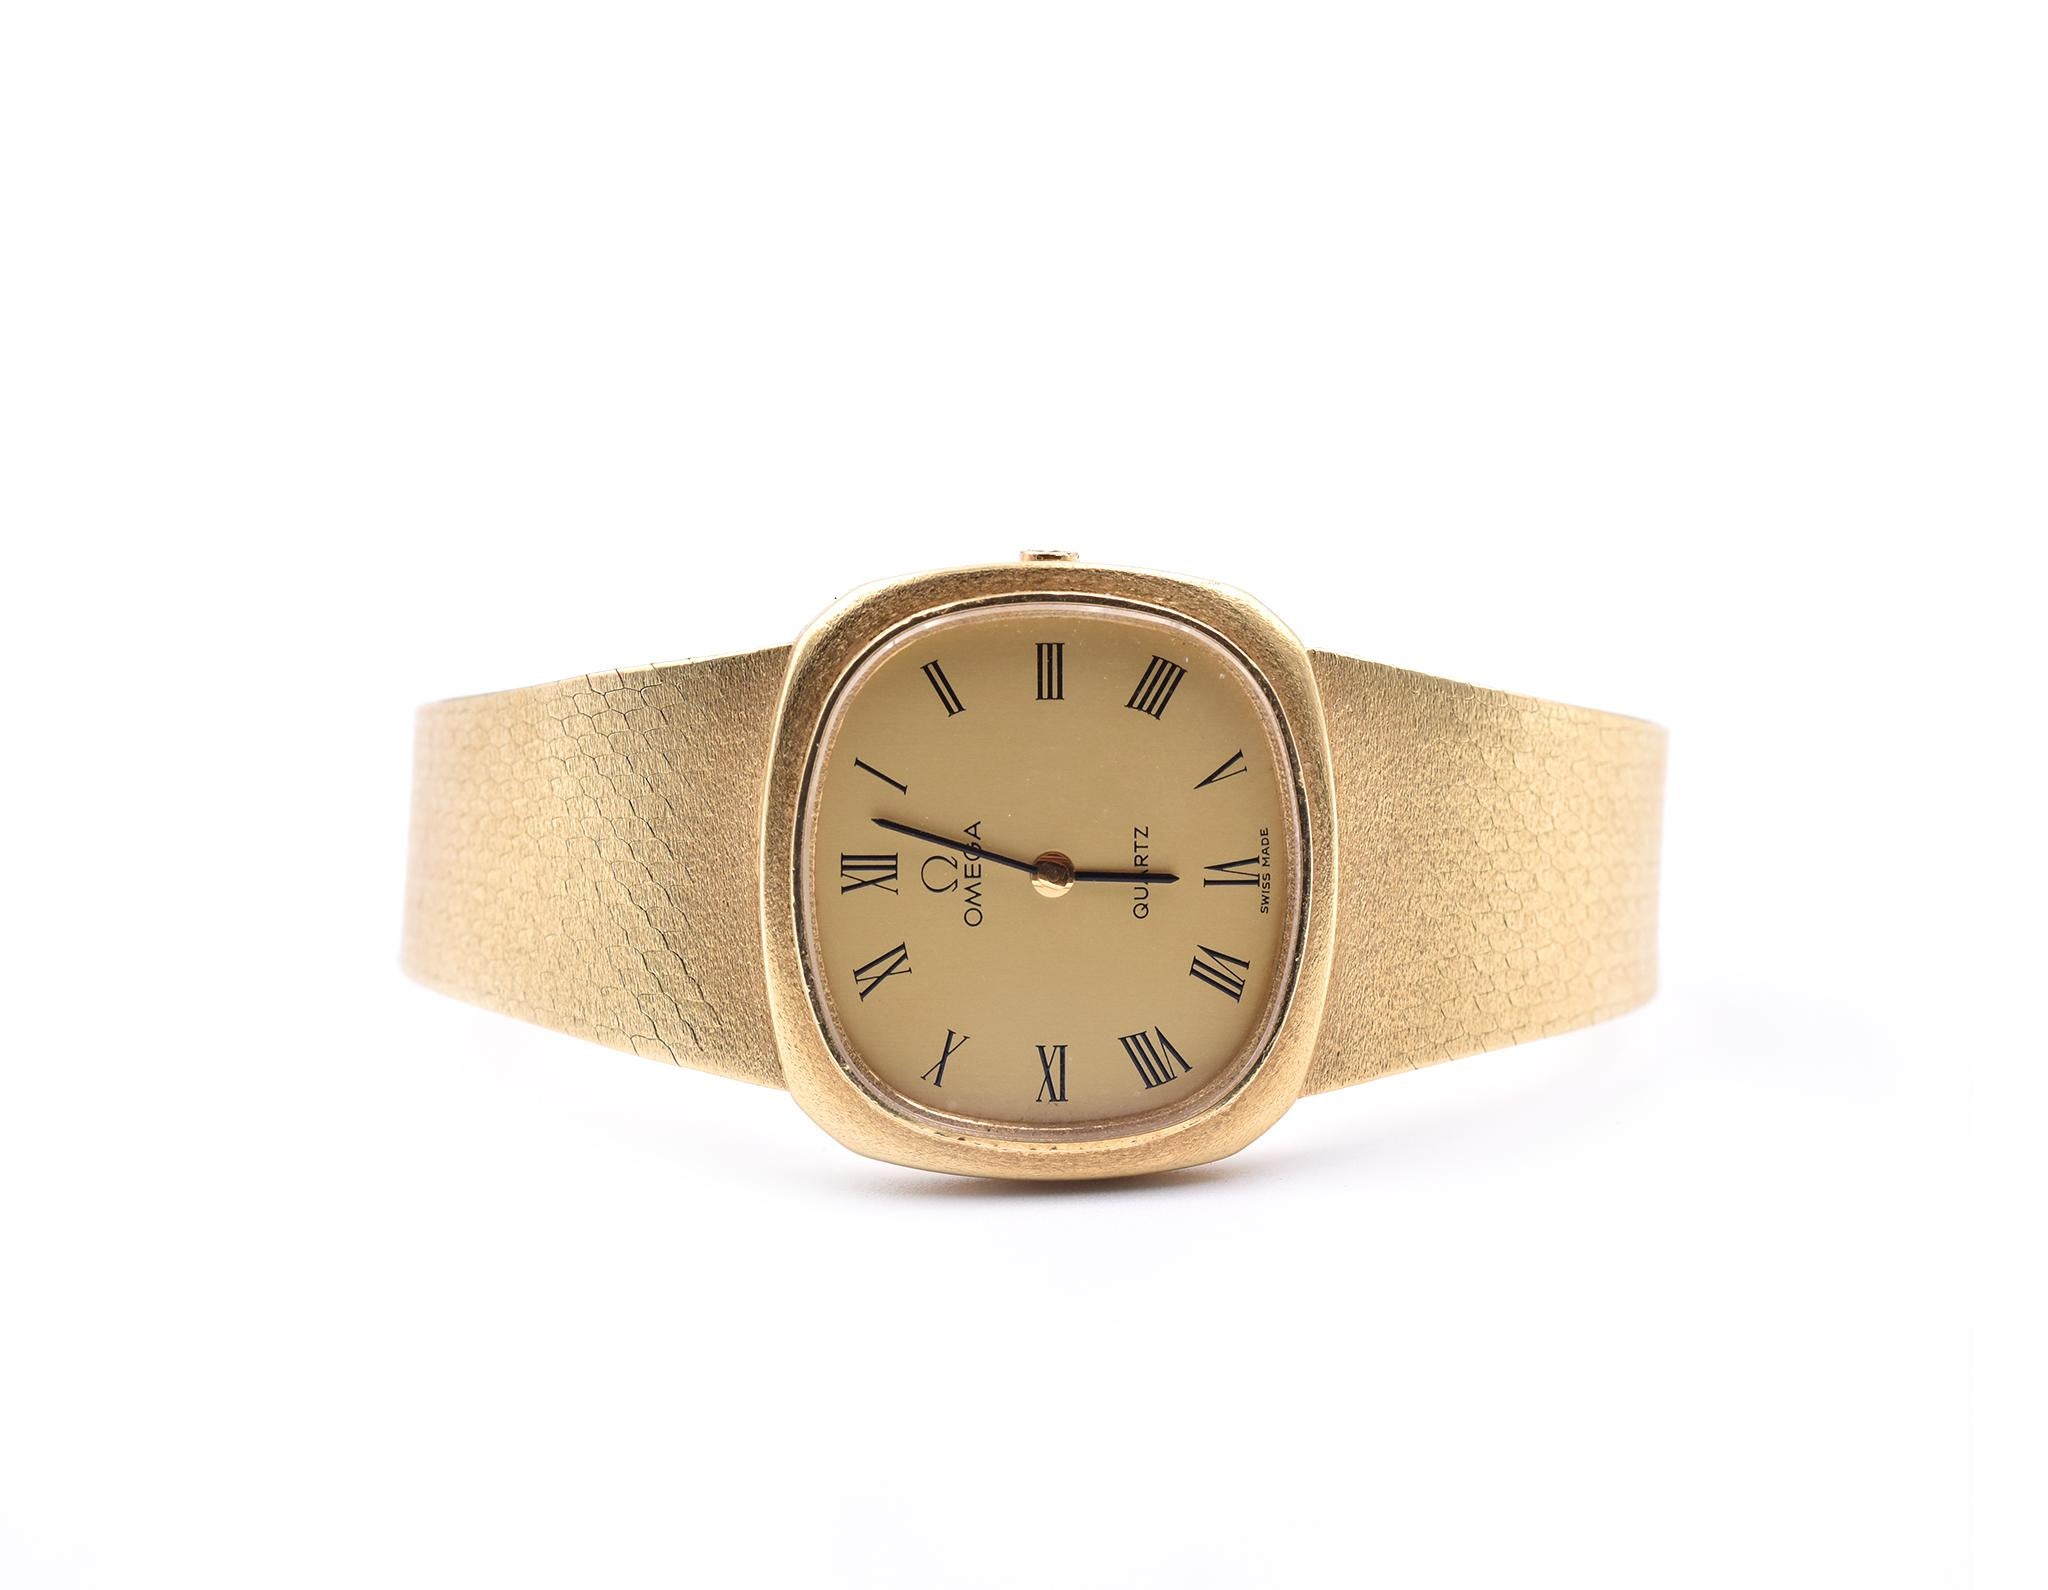 Movement: automatic
Function: hours, minutes
Case: 24.5mm x 22.80mm yellow gold case, sapphire crystal
Band: 18k yellow gold mesh bracelet
Dial: yellow gold dial with roman numeral hour markers
Serial: 5918XXX
Wrist Size: watch will currently fit up